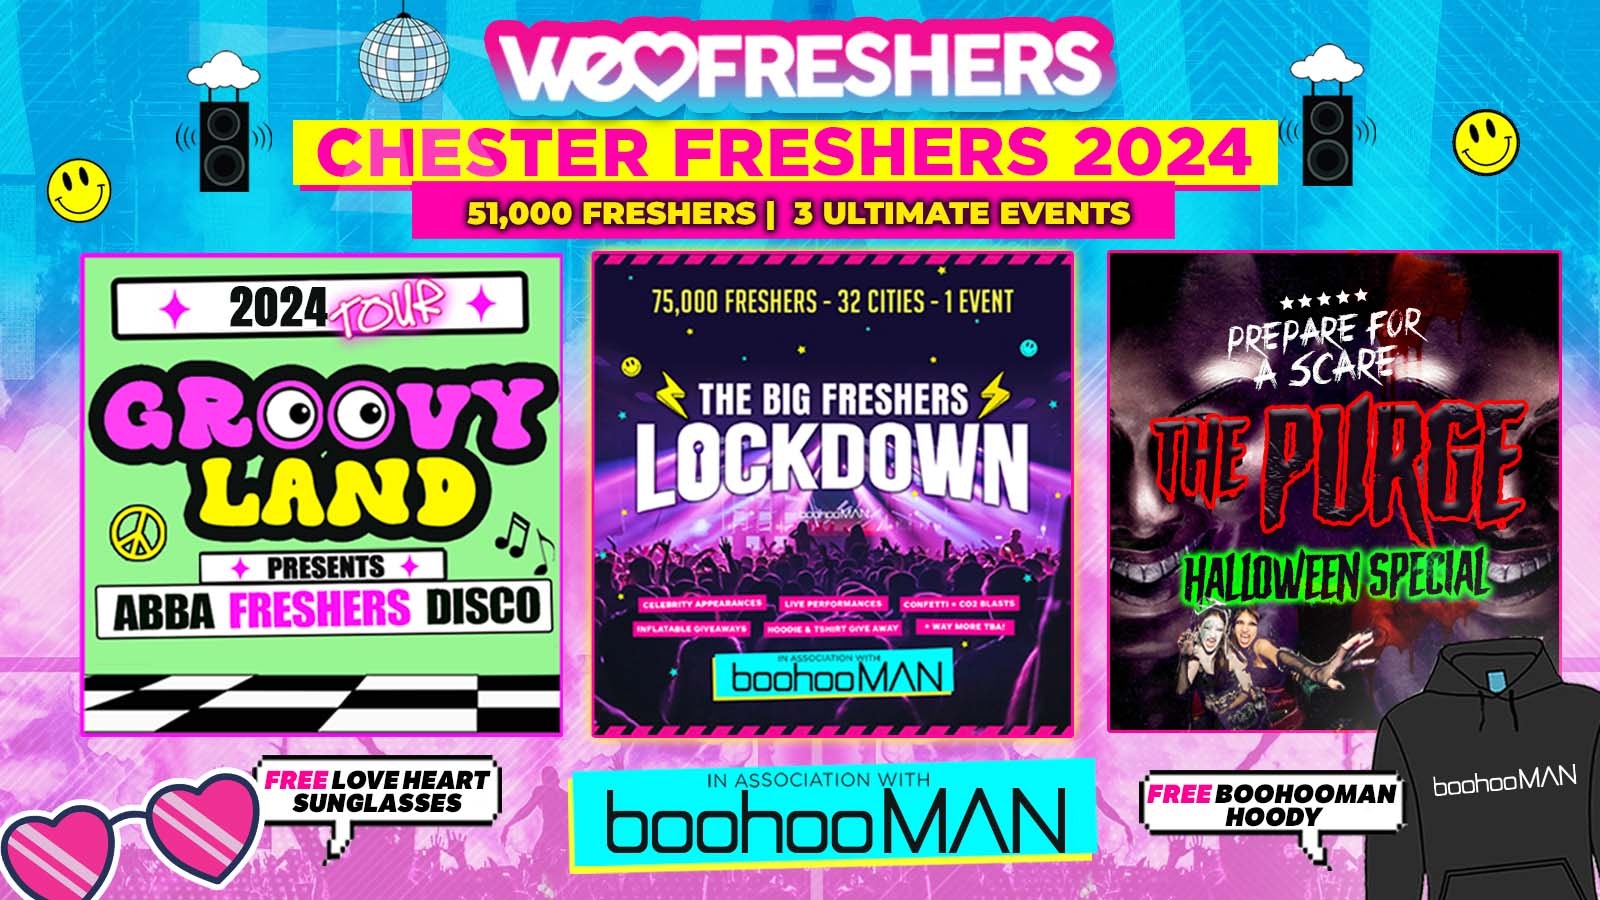 WE LOVE CHESTER FRESHERS 2024 in association with boohooMAN – 3 EVENTS❗